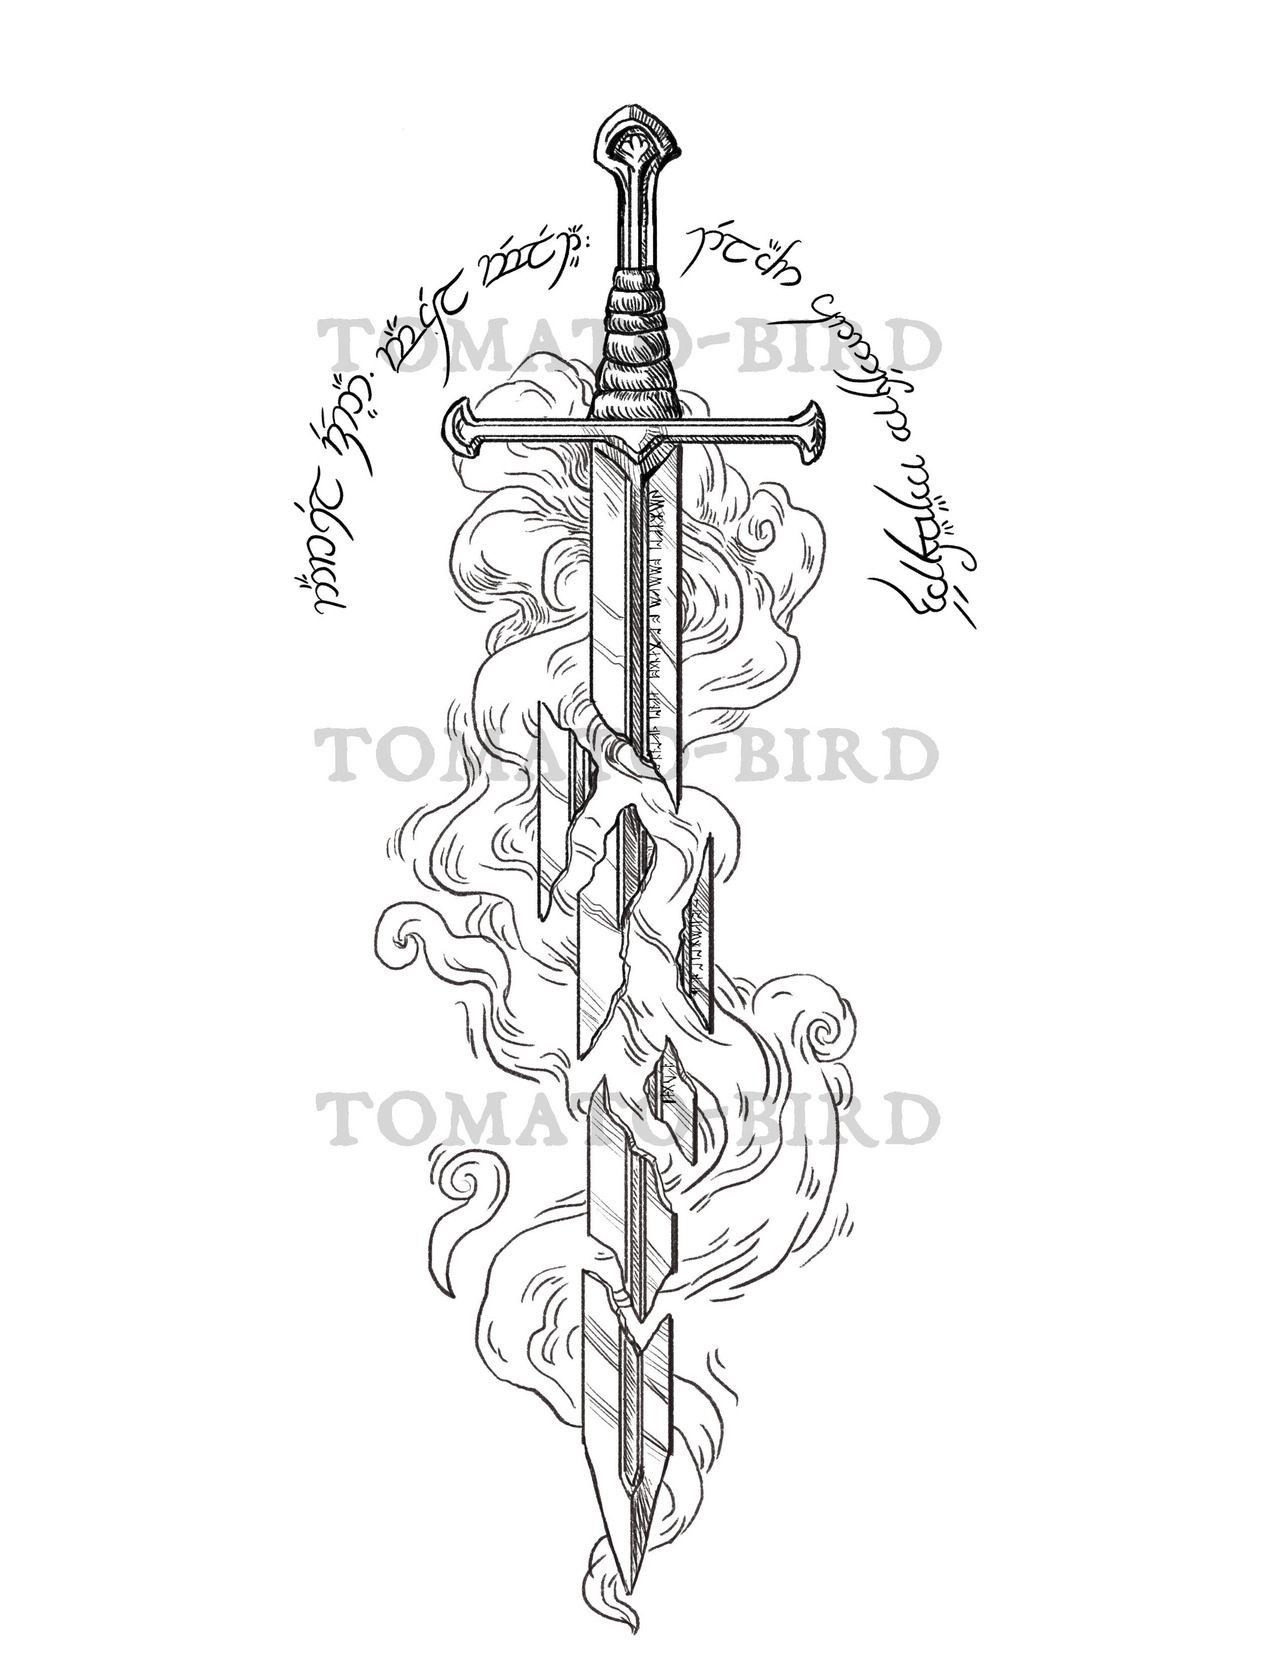 Narsil Sword Gifts  Merchandise for Sale  Redbubble